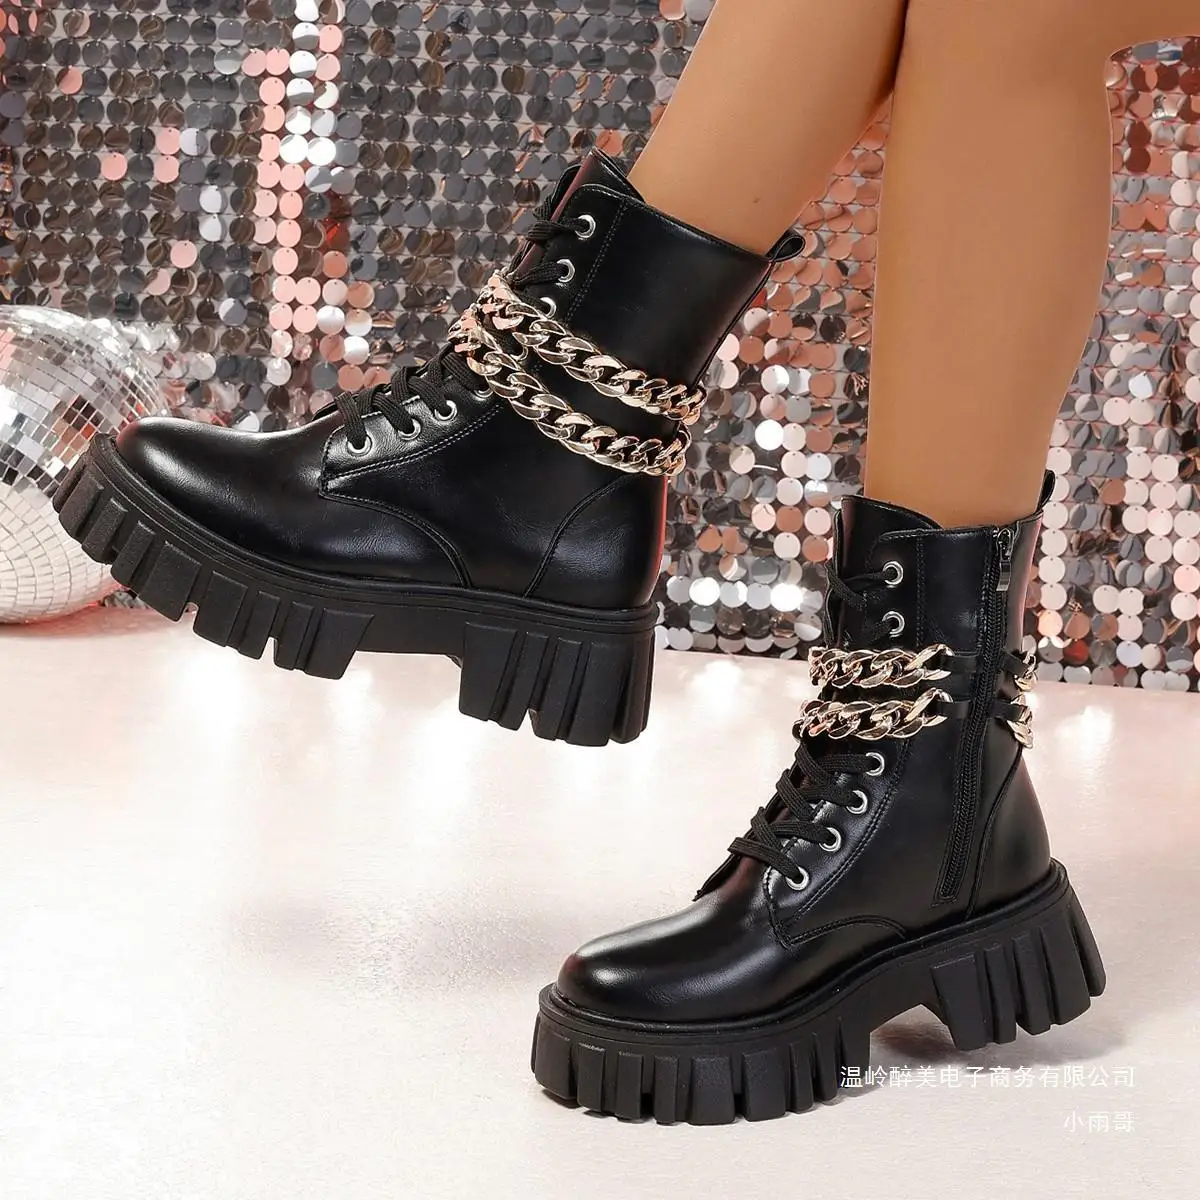 

Ankle BootsThick Bottom Short Platform Women Boots Black Motorcycle Women Shoes Side Zipper Winter New Martin Retro Gothics Boot